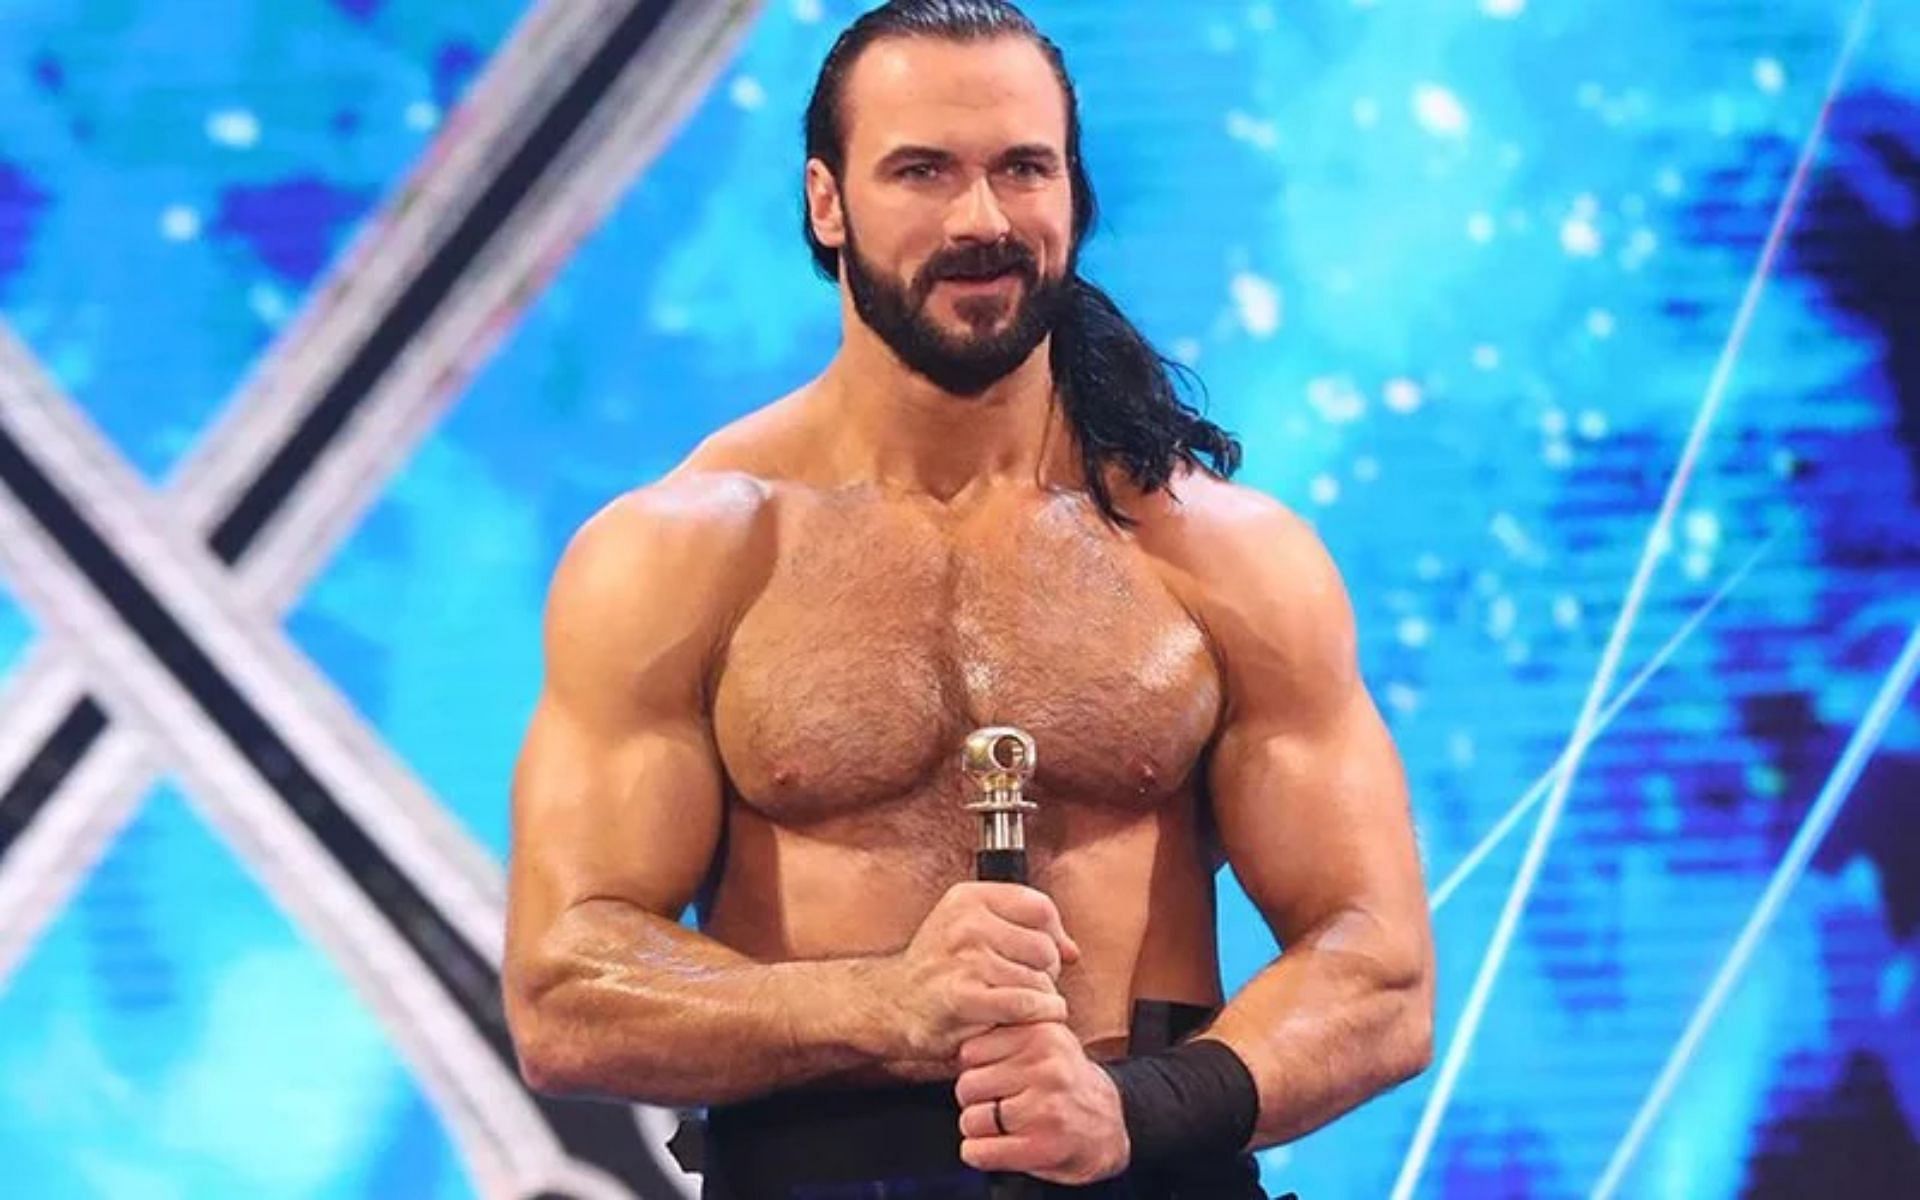 Drew McIntyre is always showing his appreciation for the fans.